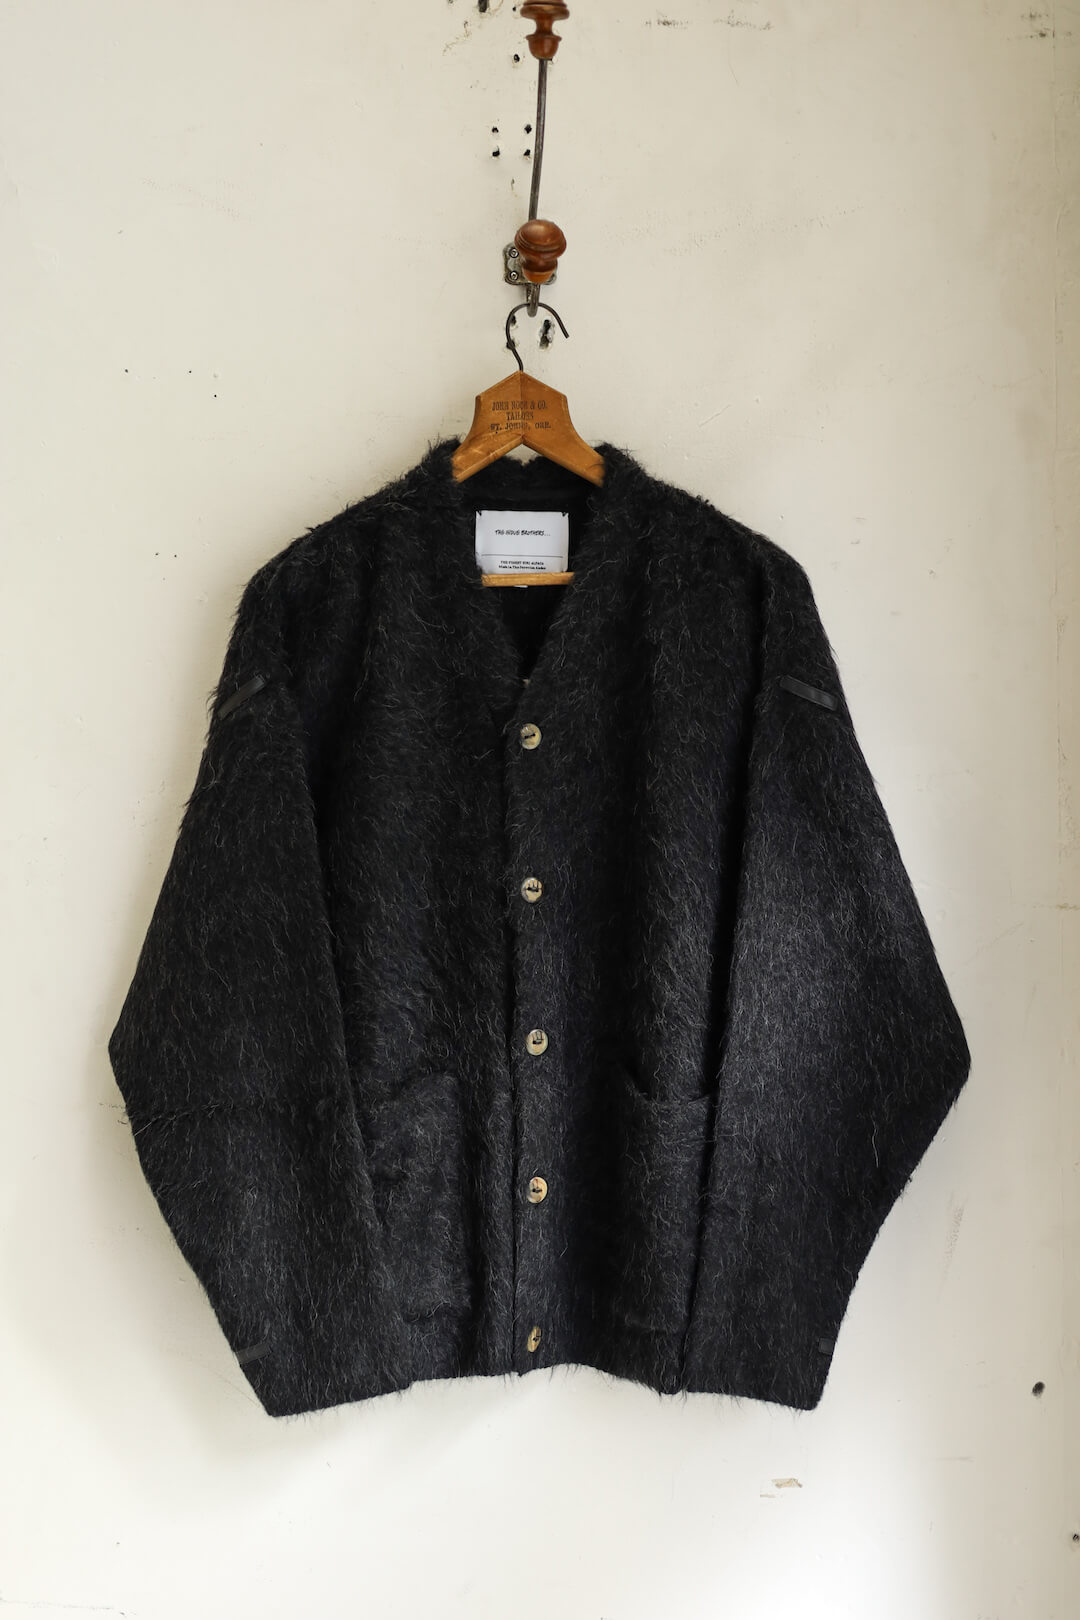 SURI CARDIGAN - The Inoue Brothers - ARCH ONLINE SHOP